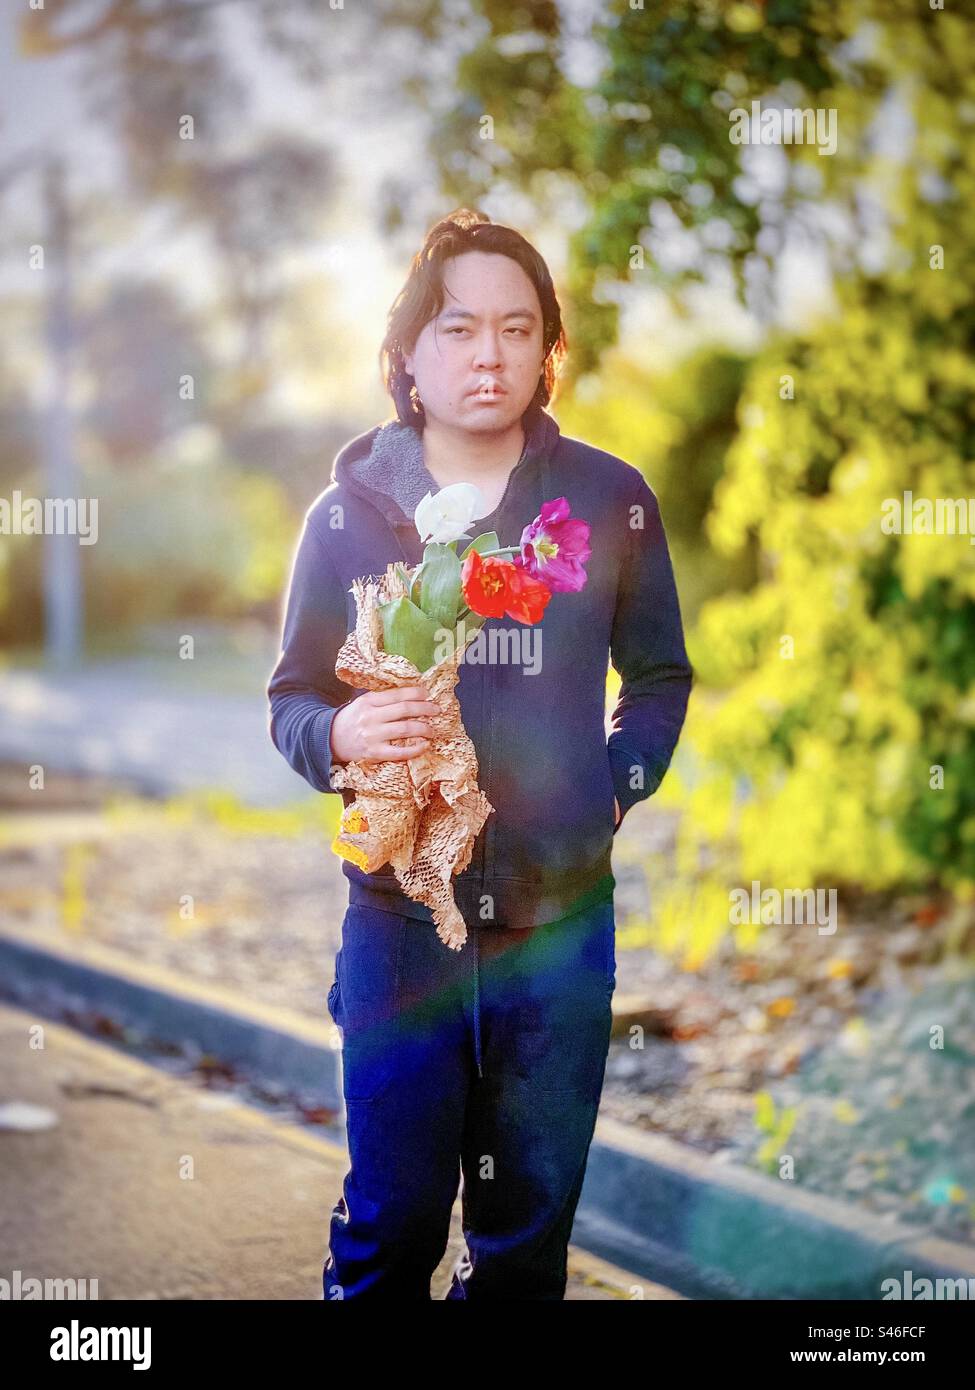 Three quarter length portrait of young Asian man holding white, red and purple tulips against setting sun and trees with rainbow lens flare. Focus on foreground. Spring theme. Golden hour. Dreamy. Stock Photo